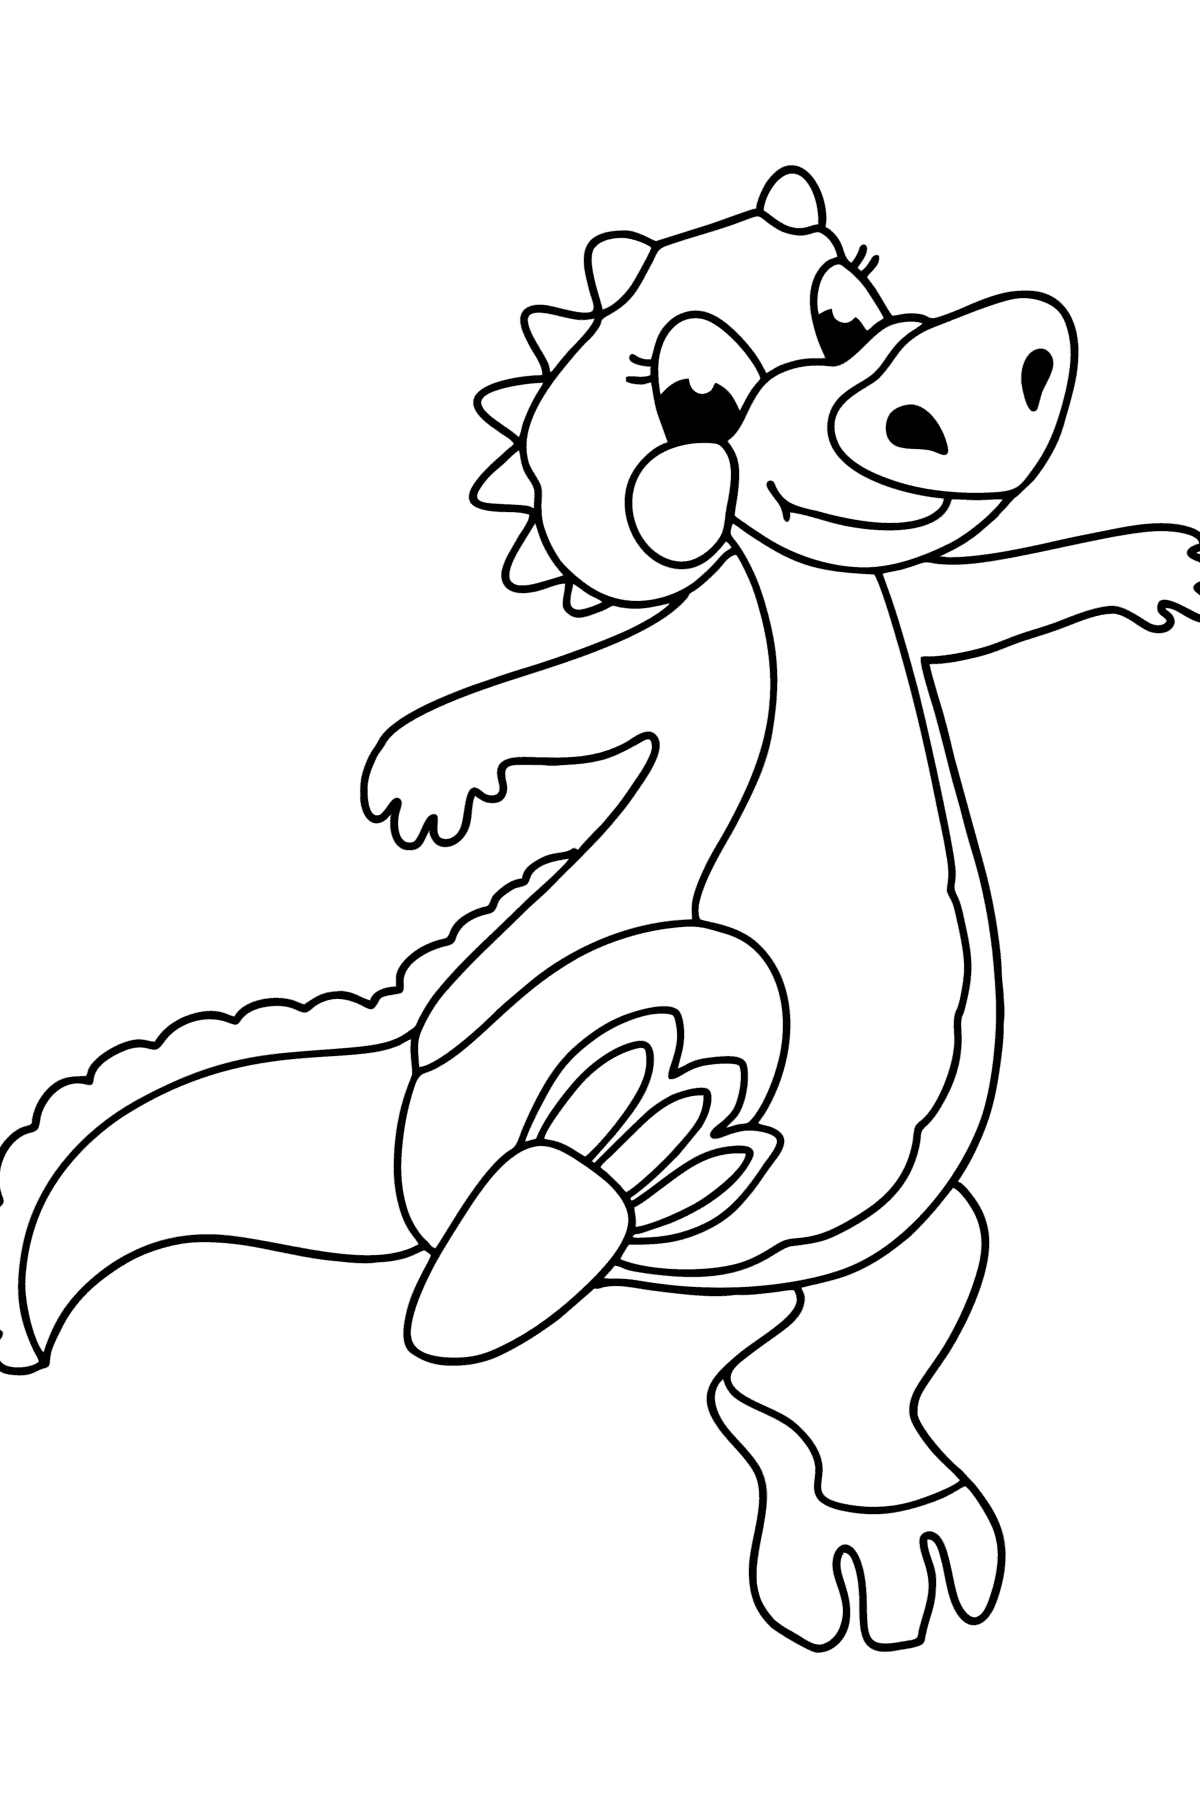 Happy dragon baby coloring page - Coloring Pages for Kids